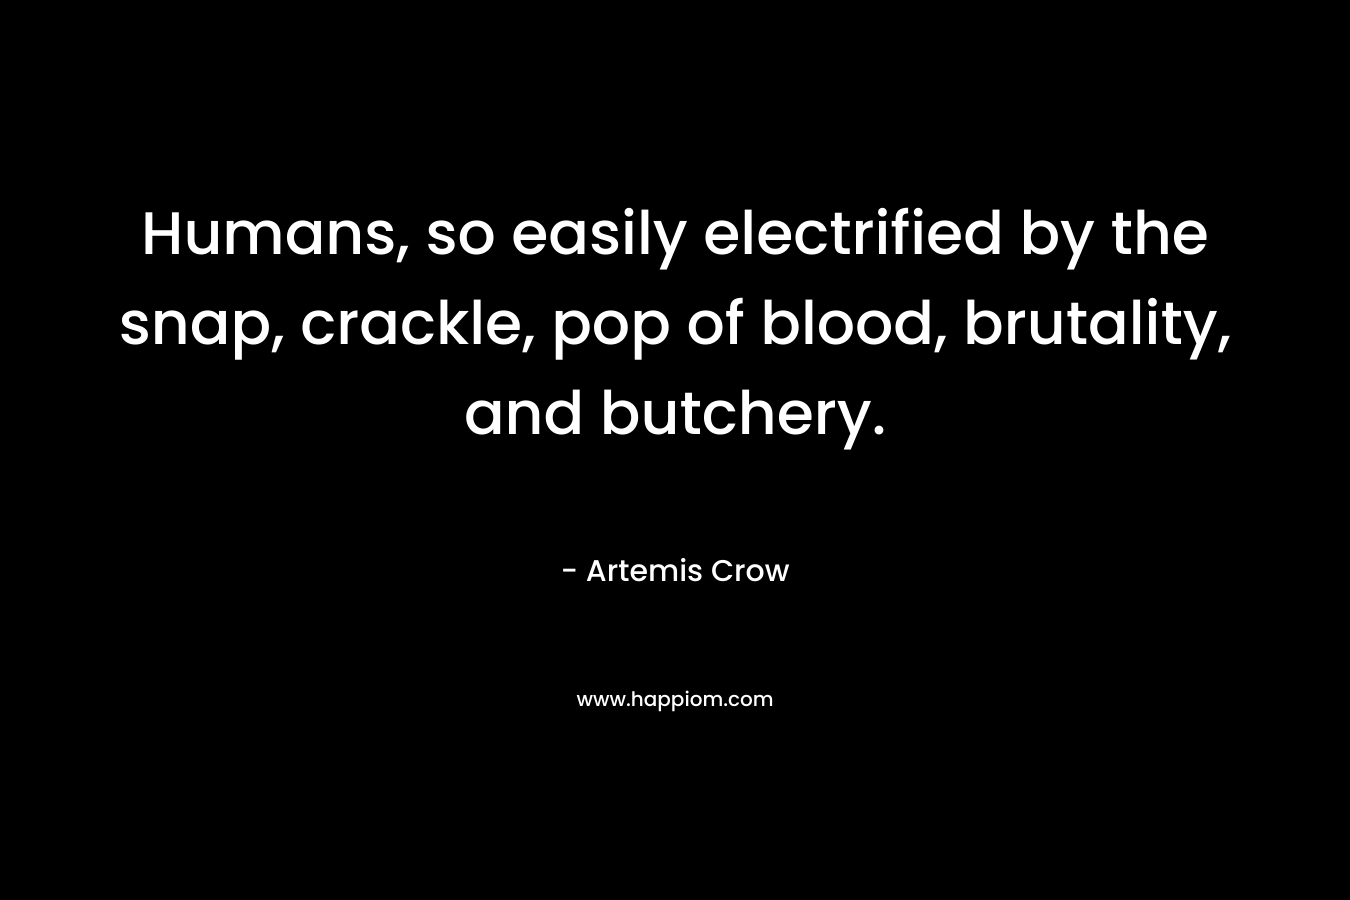 Humans, so easily electrified by the snap, crackle, pop of blood, brutality, and butchery. – Artemis Crow